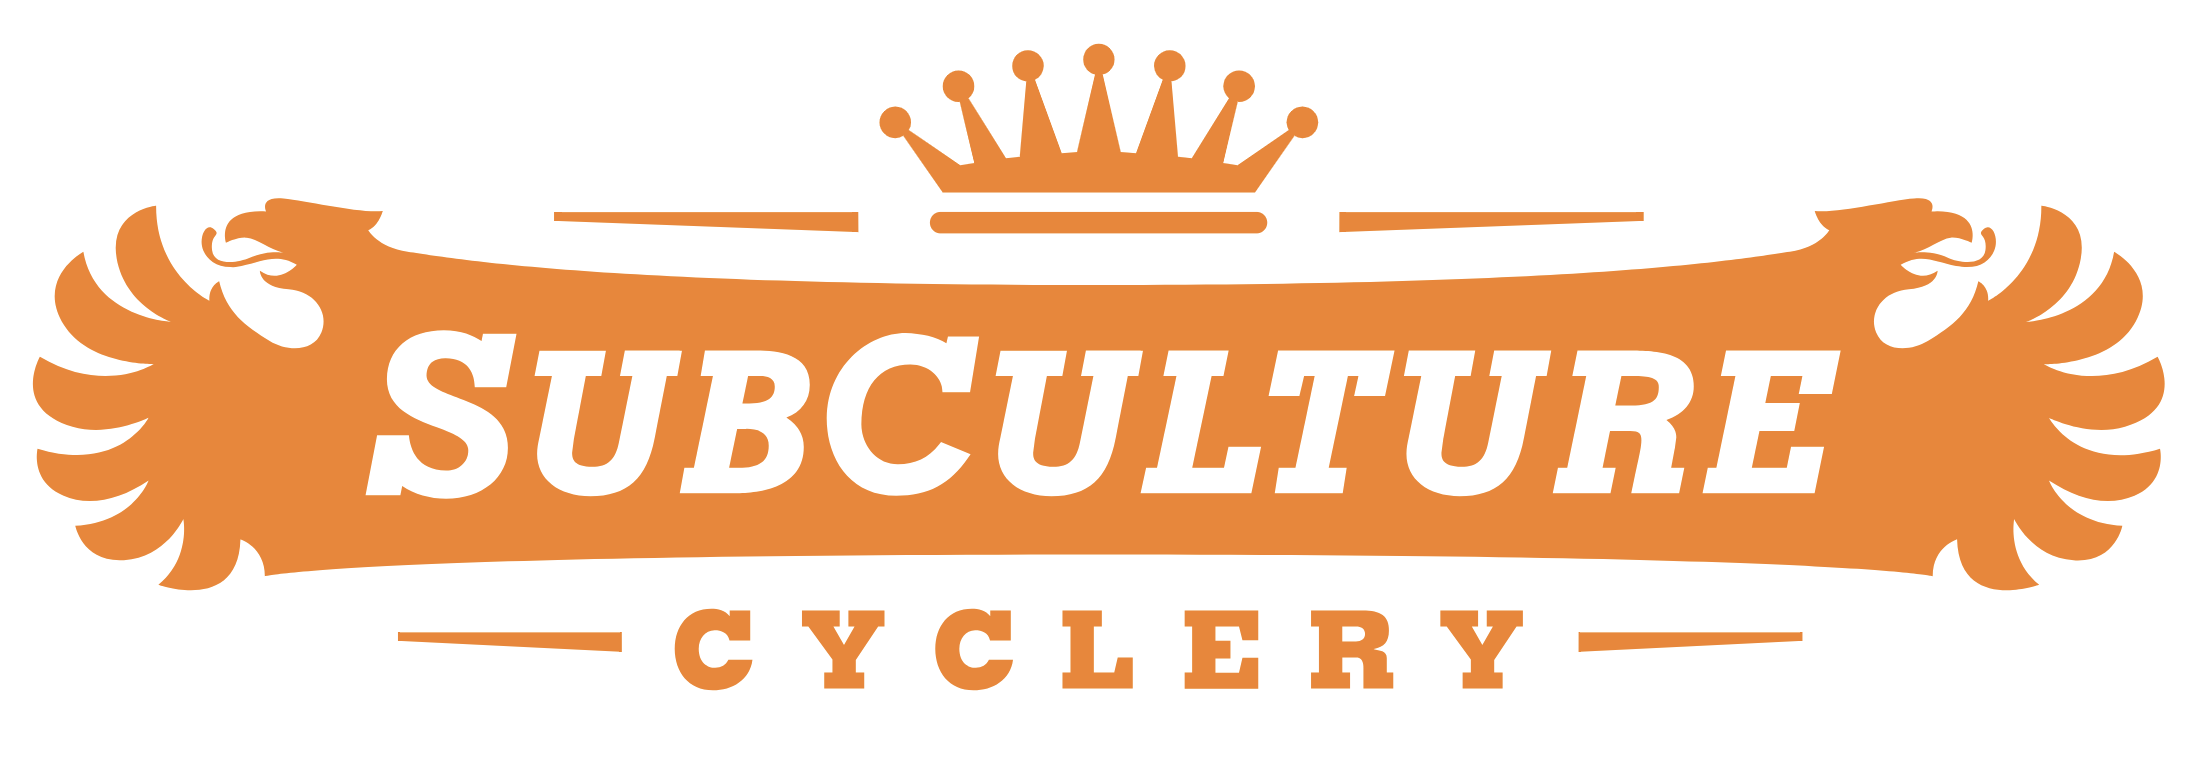 Subculture Cyclery.png